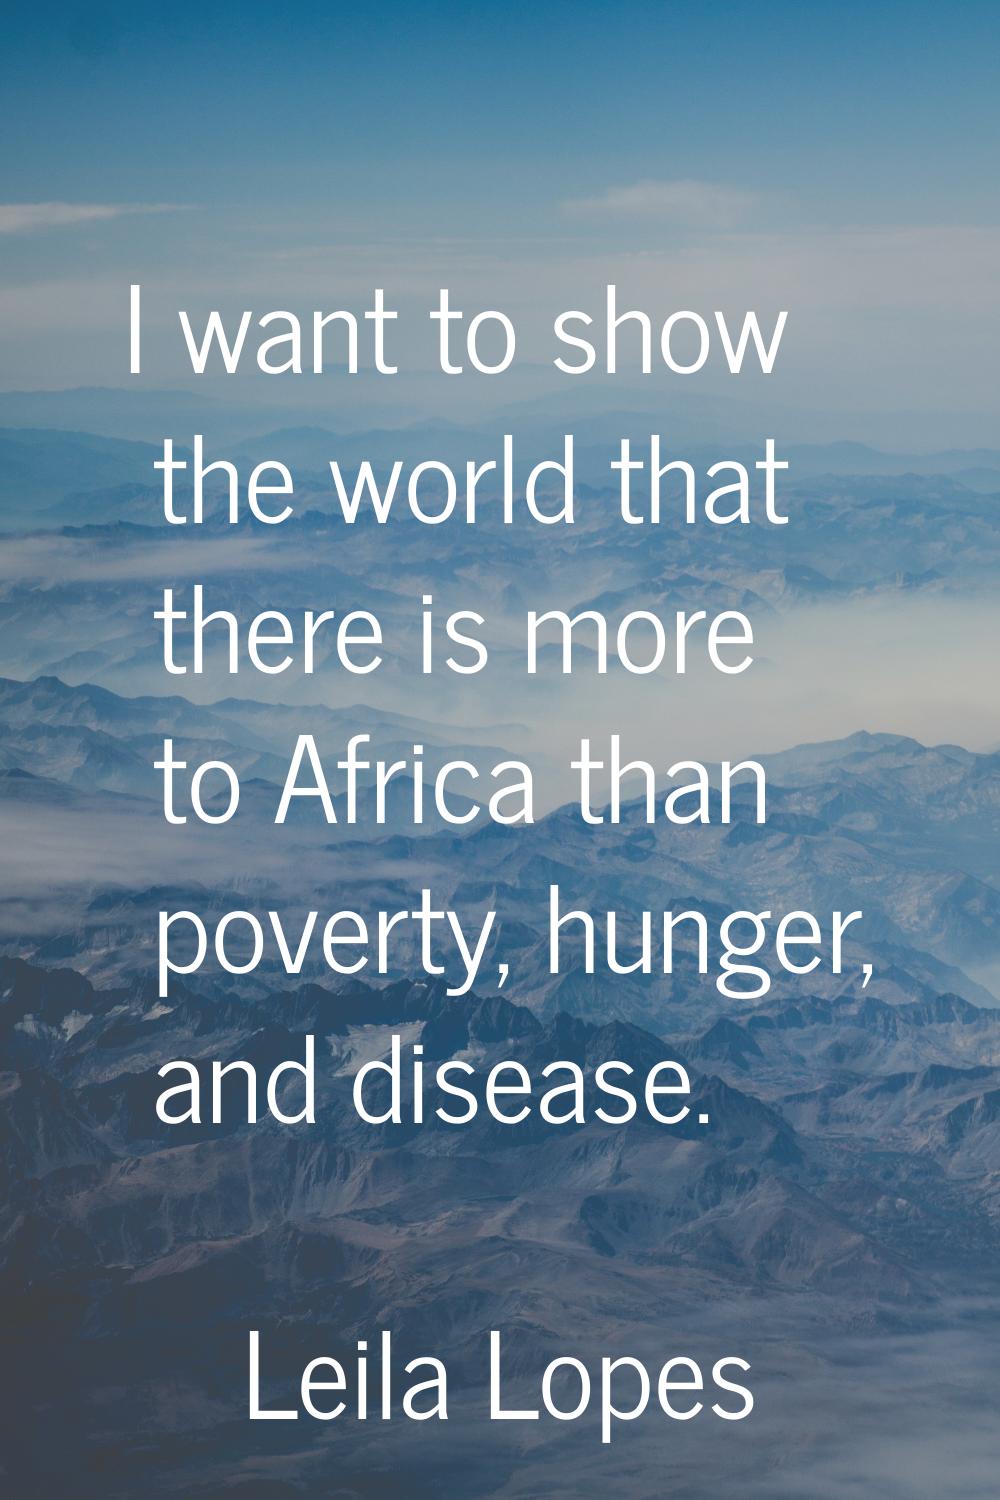 I want to show the world that there is more to Africa than poverty, hunger, and disease.